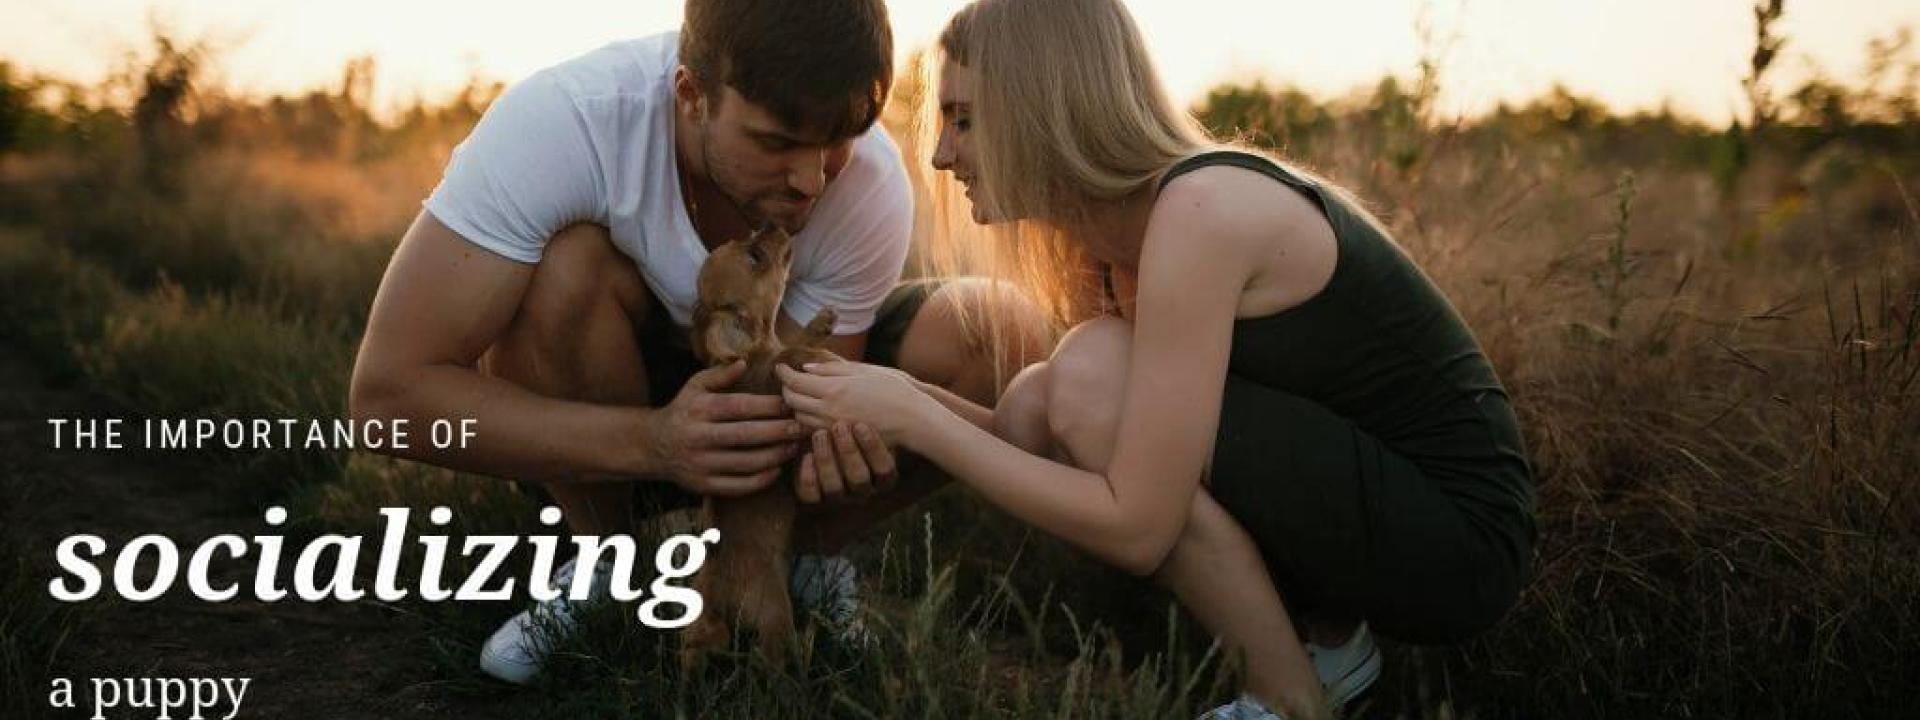 Couple playing with a puppy